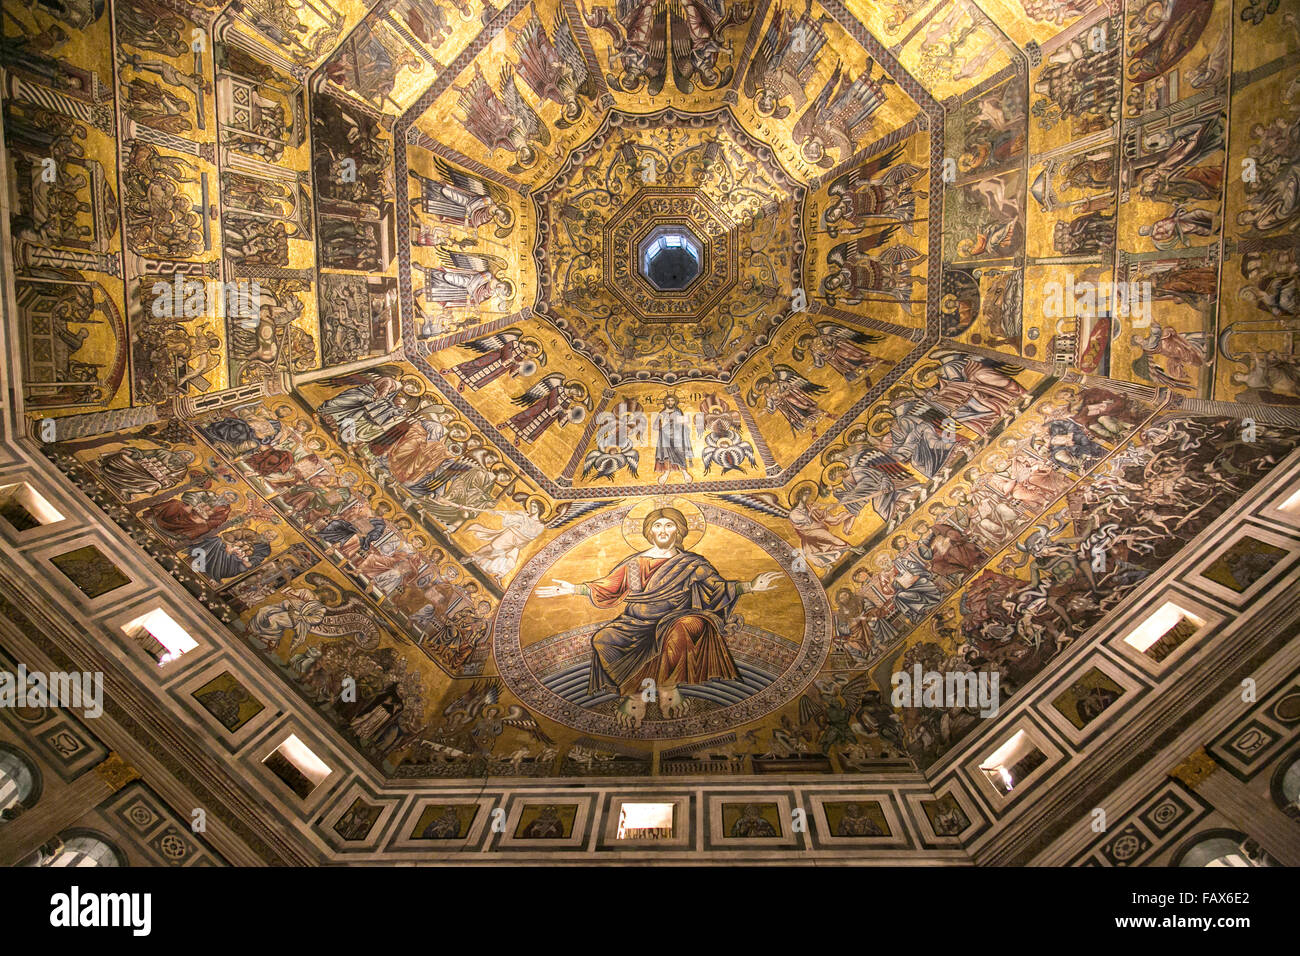 The wonderful ceiling of the Baptistery of Saint John in Florence, Italy. Stock Photo